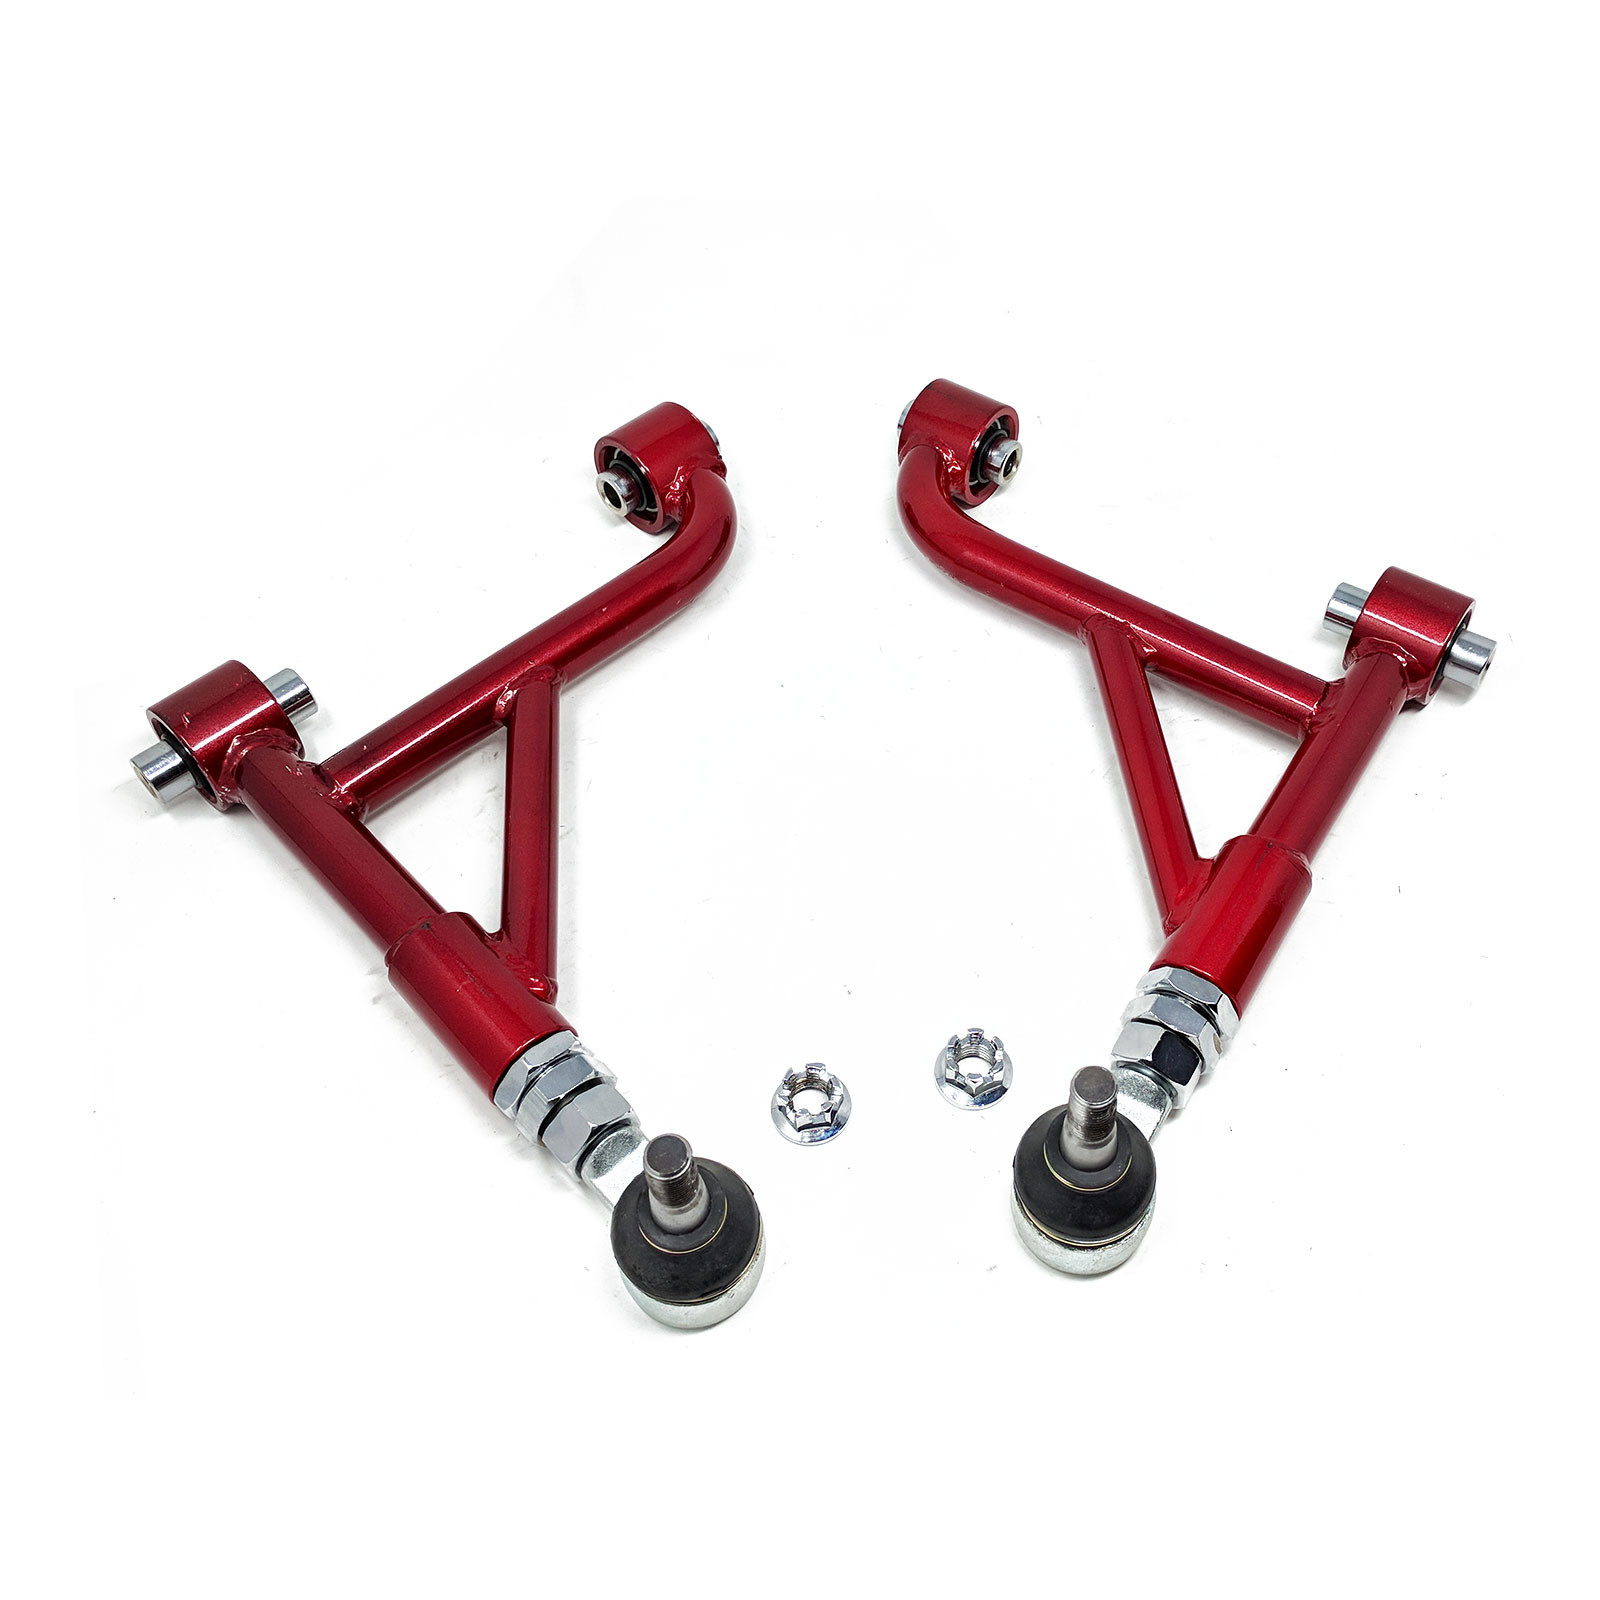 Truhart Adjustable Rear Upper Camber Kit Compatible with Lexus IS300 GS300 GS400 